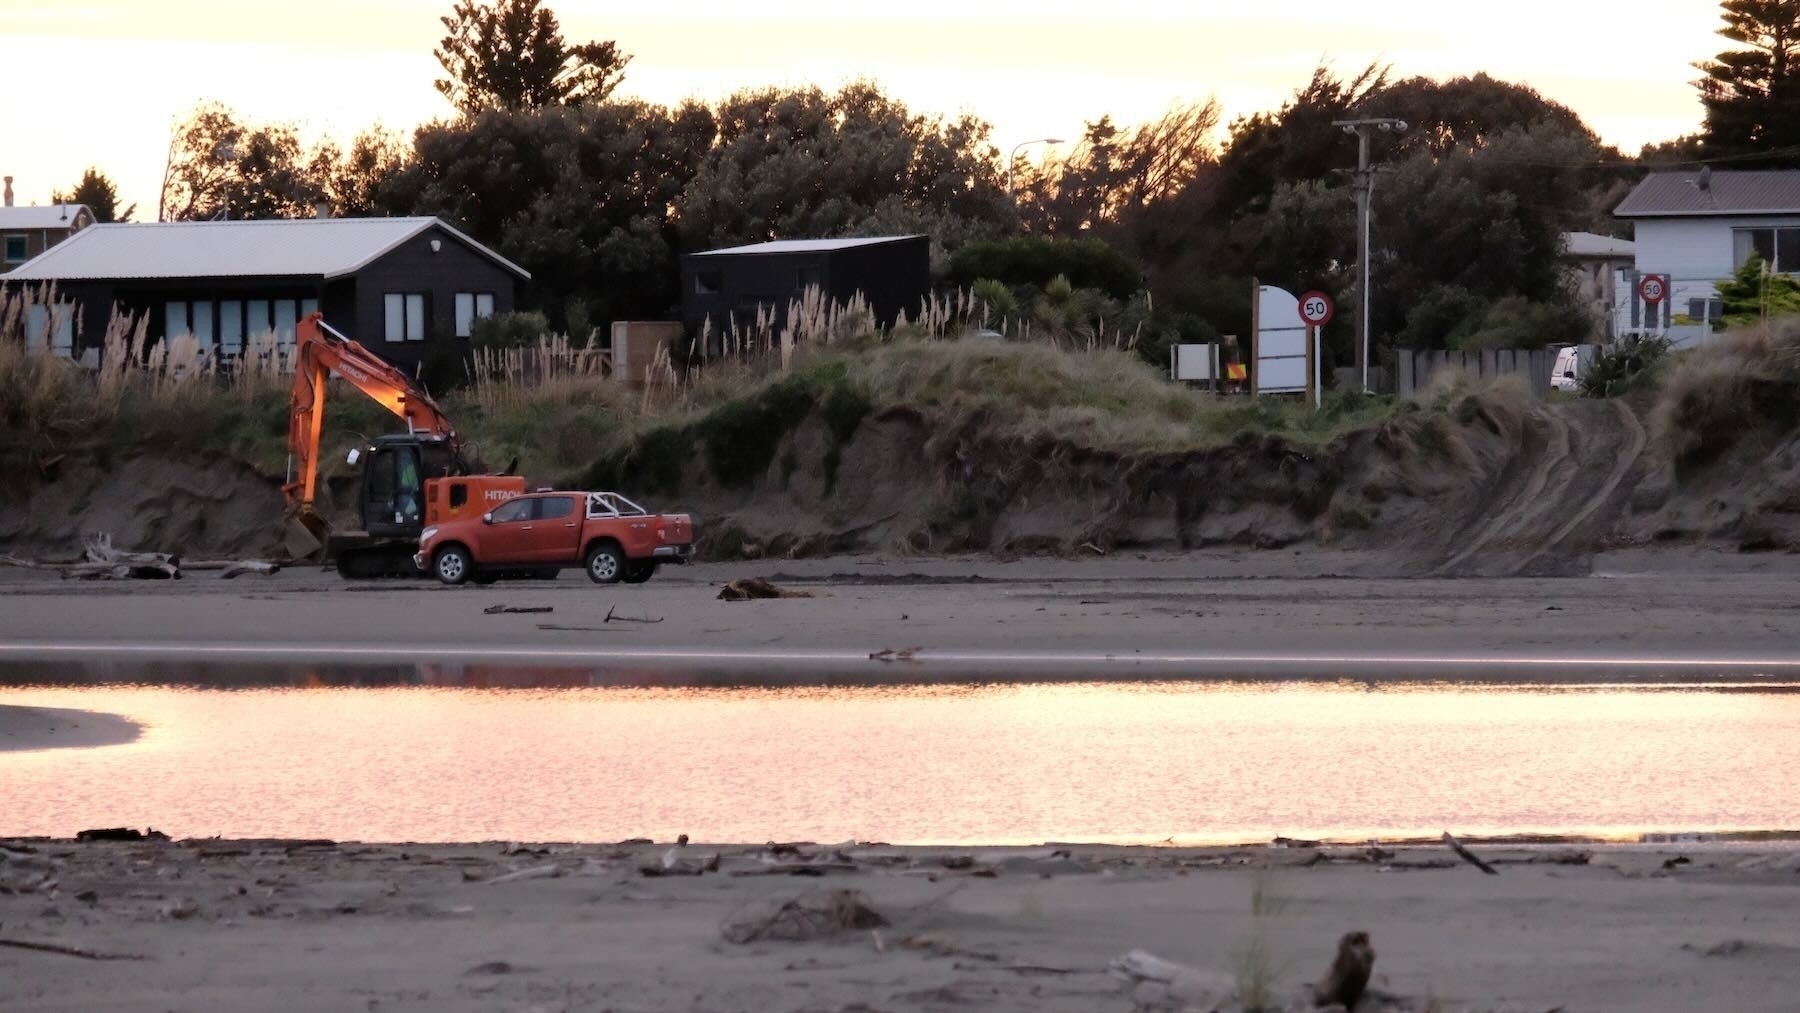 The digger arrived at dawn — on the beach near a car with sunlight reflected in water. 